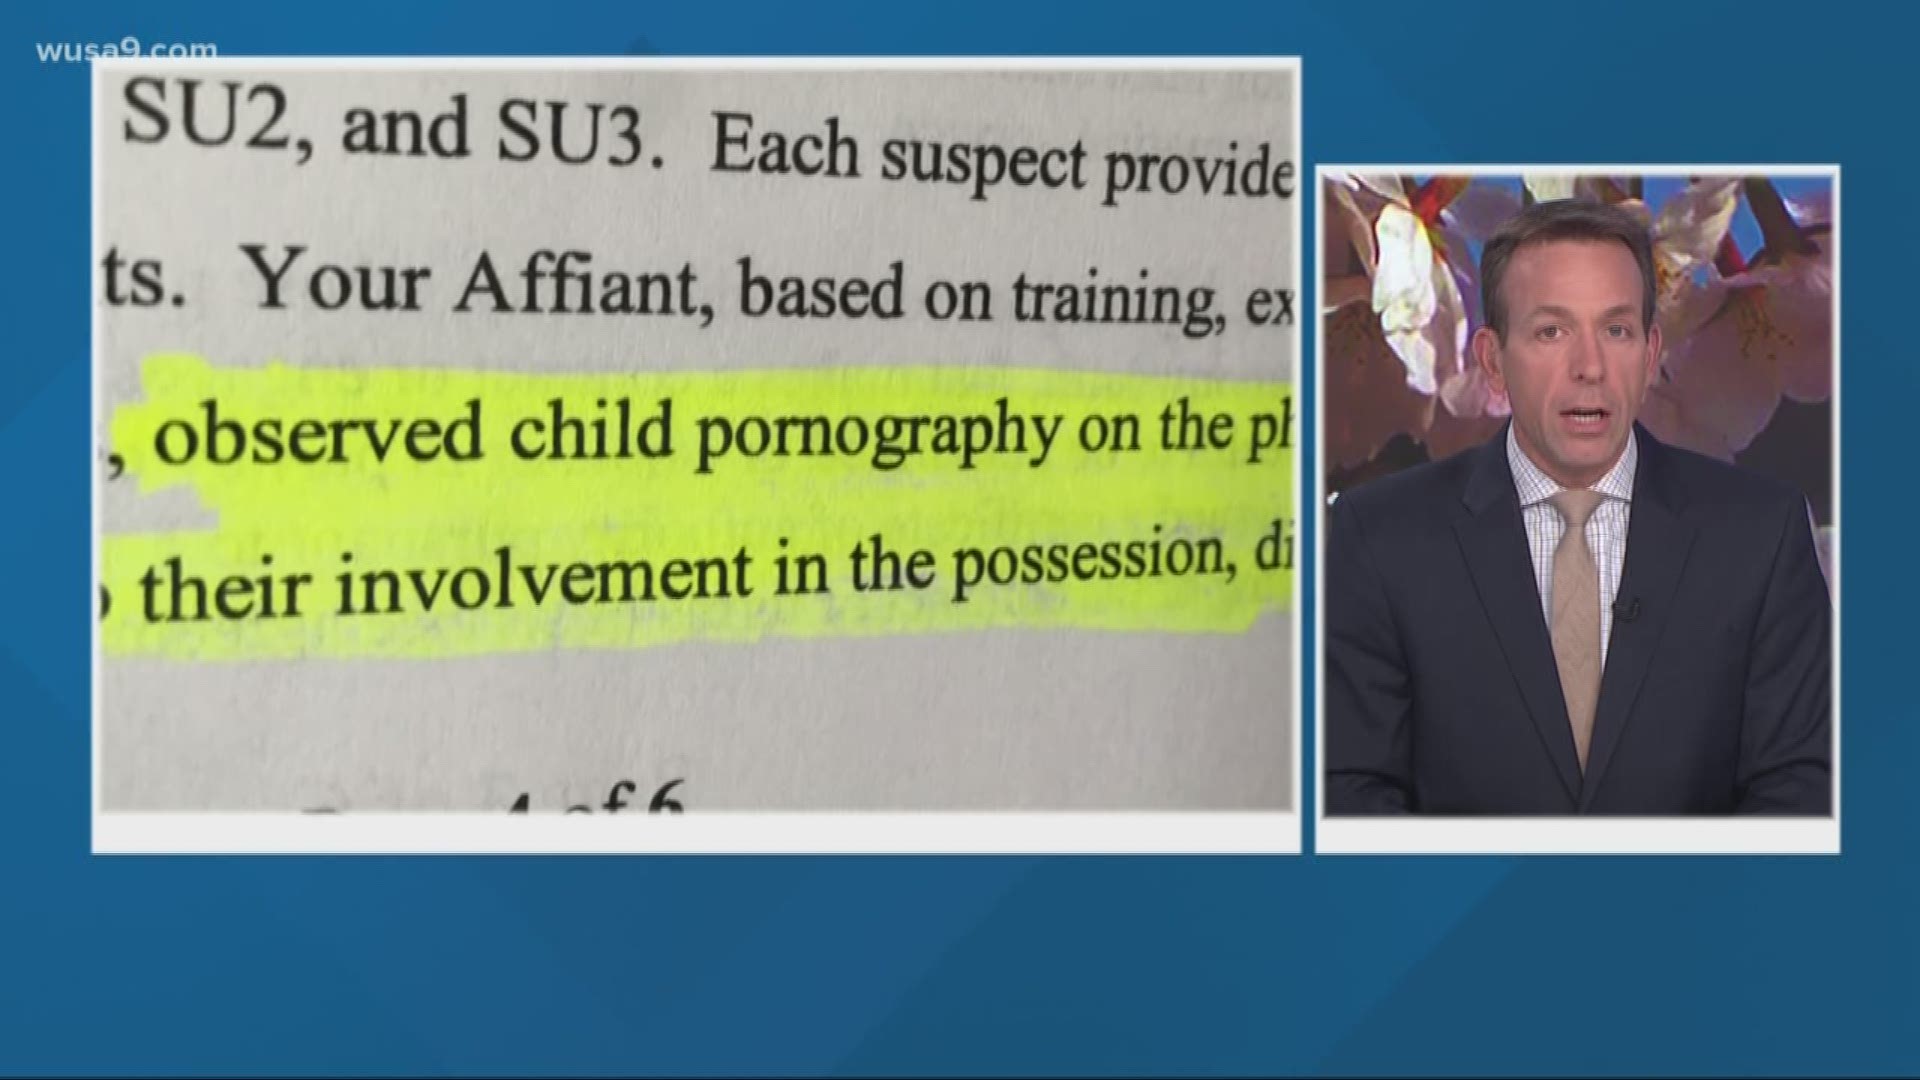 Nude Toddler Porn - Fairfax teens shared child porn on anonymous Snapchat, police say |  wusa9.com